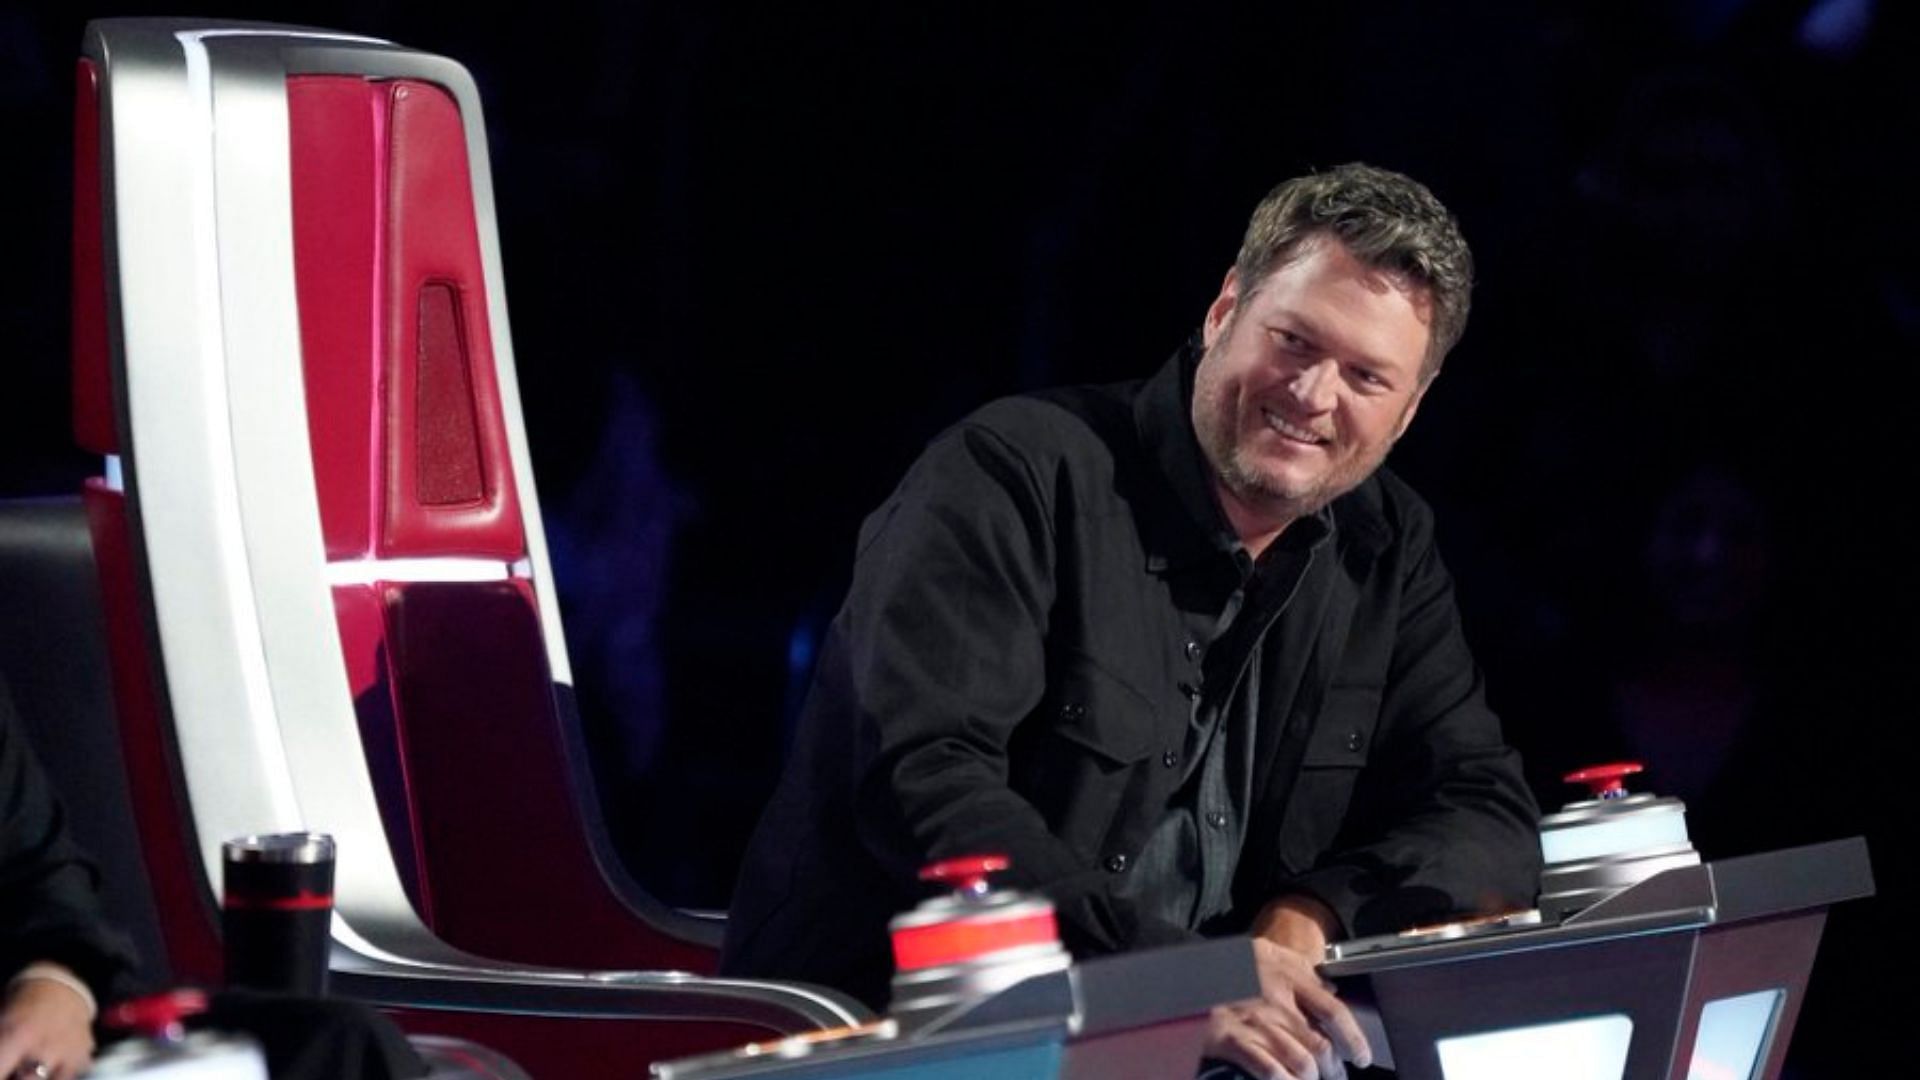 Blake Shelton hits his button one final time on The Voice